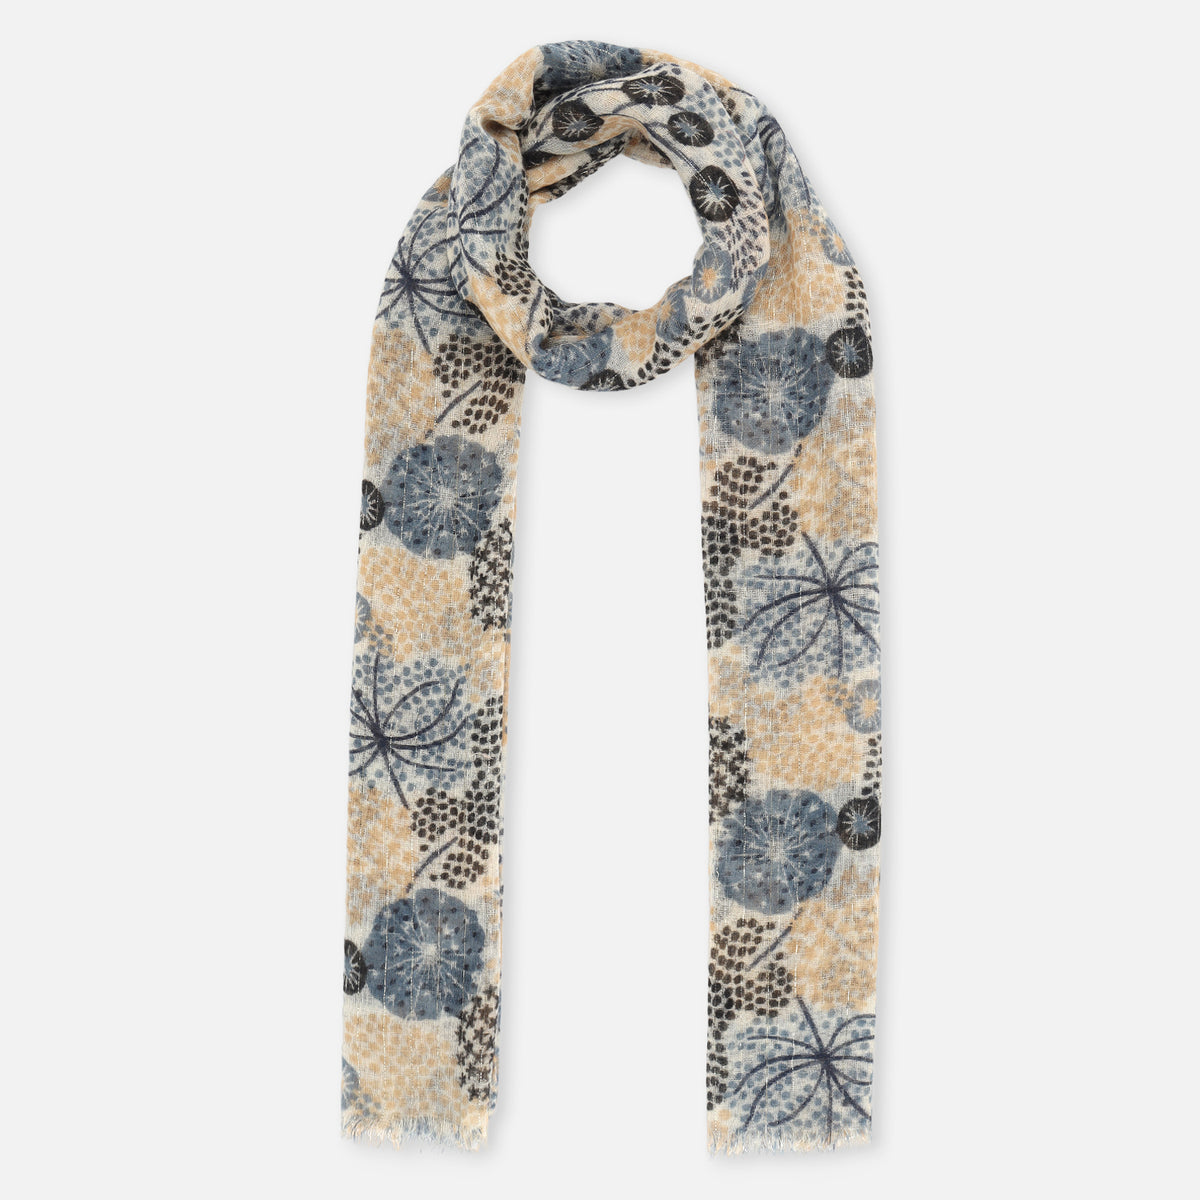 Off white woolen printed stole